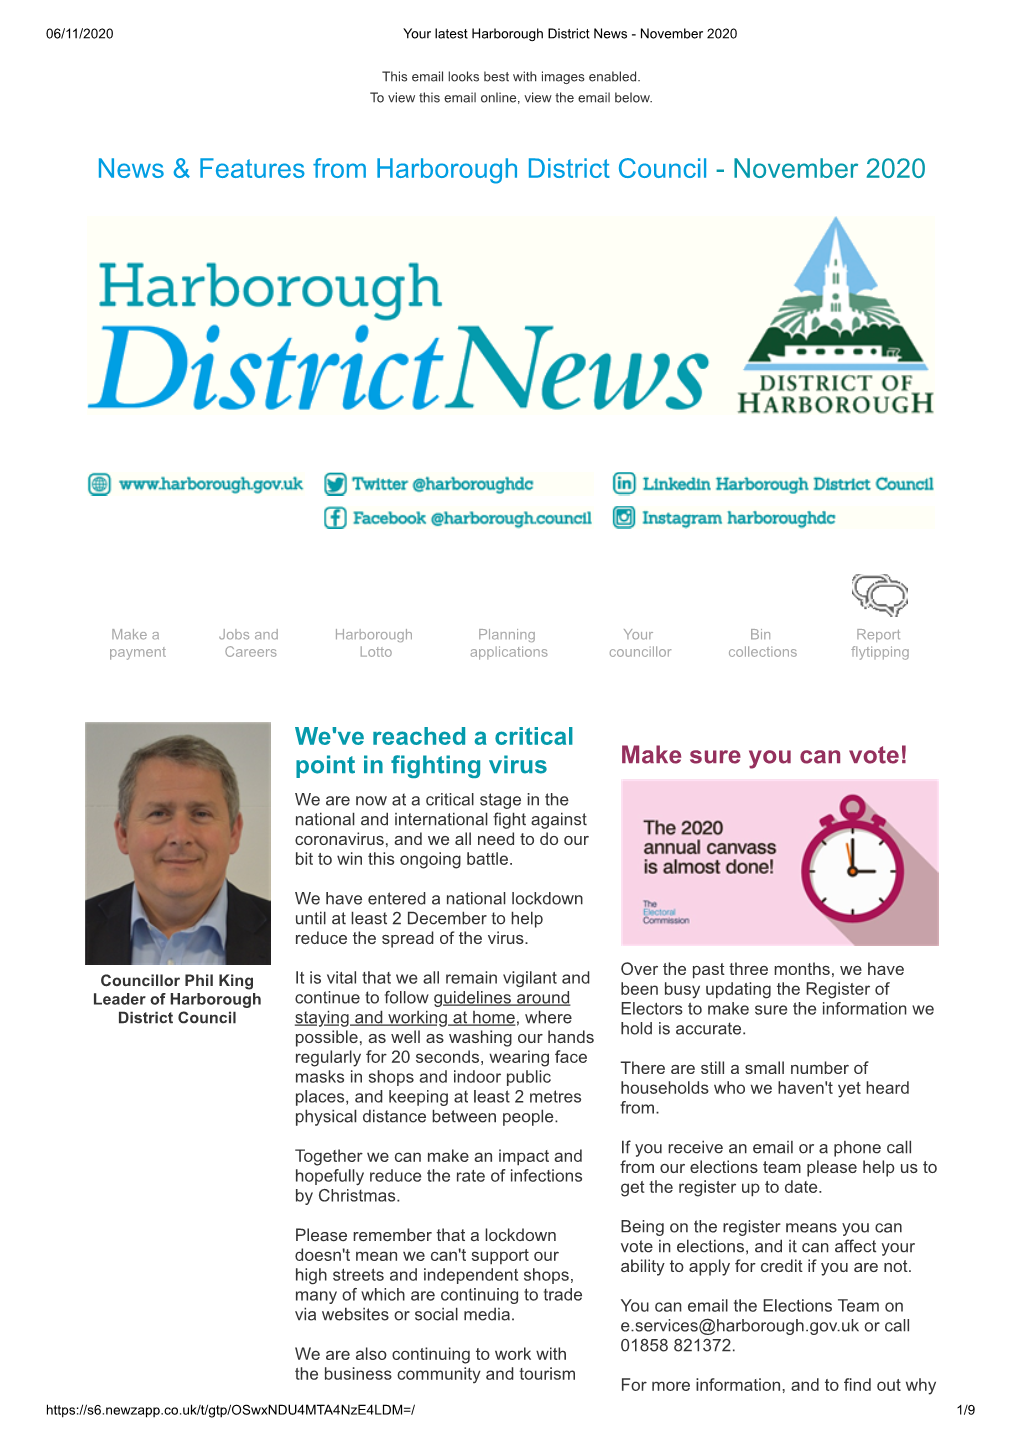 News & Features from Harborough